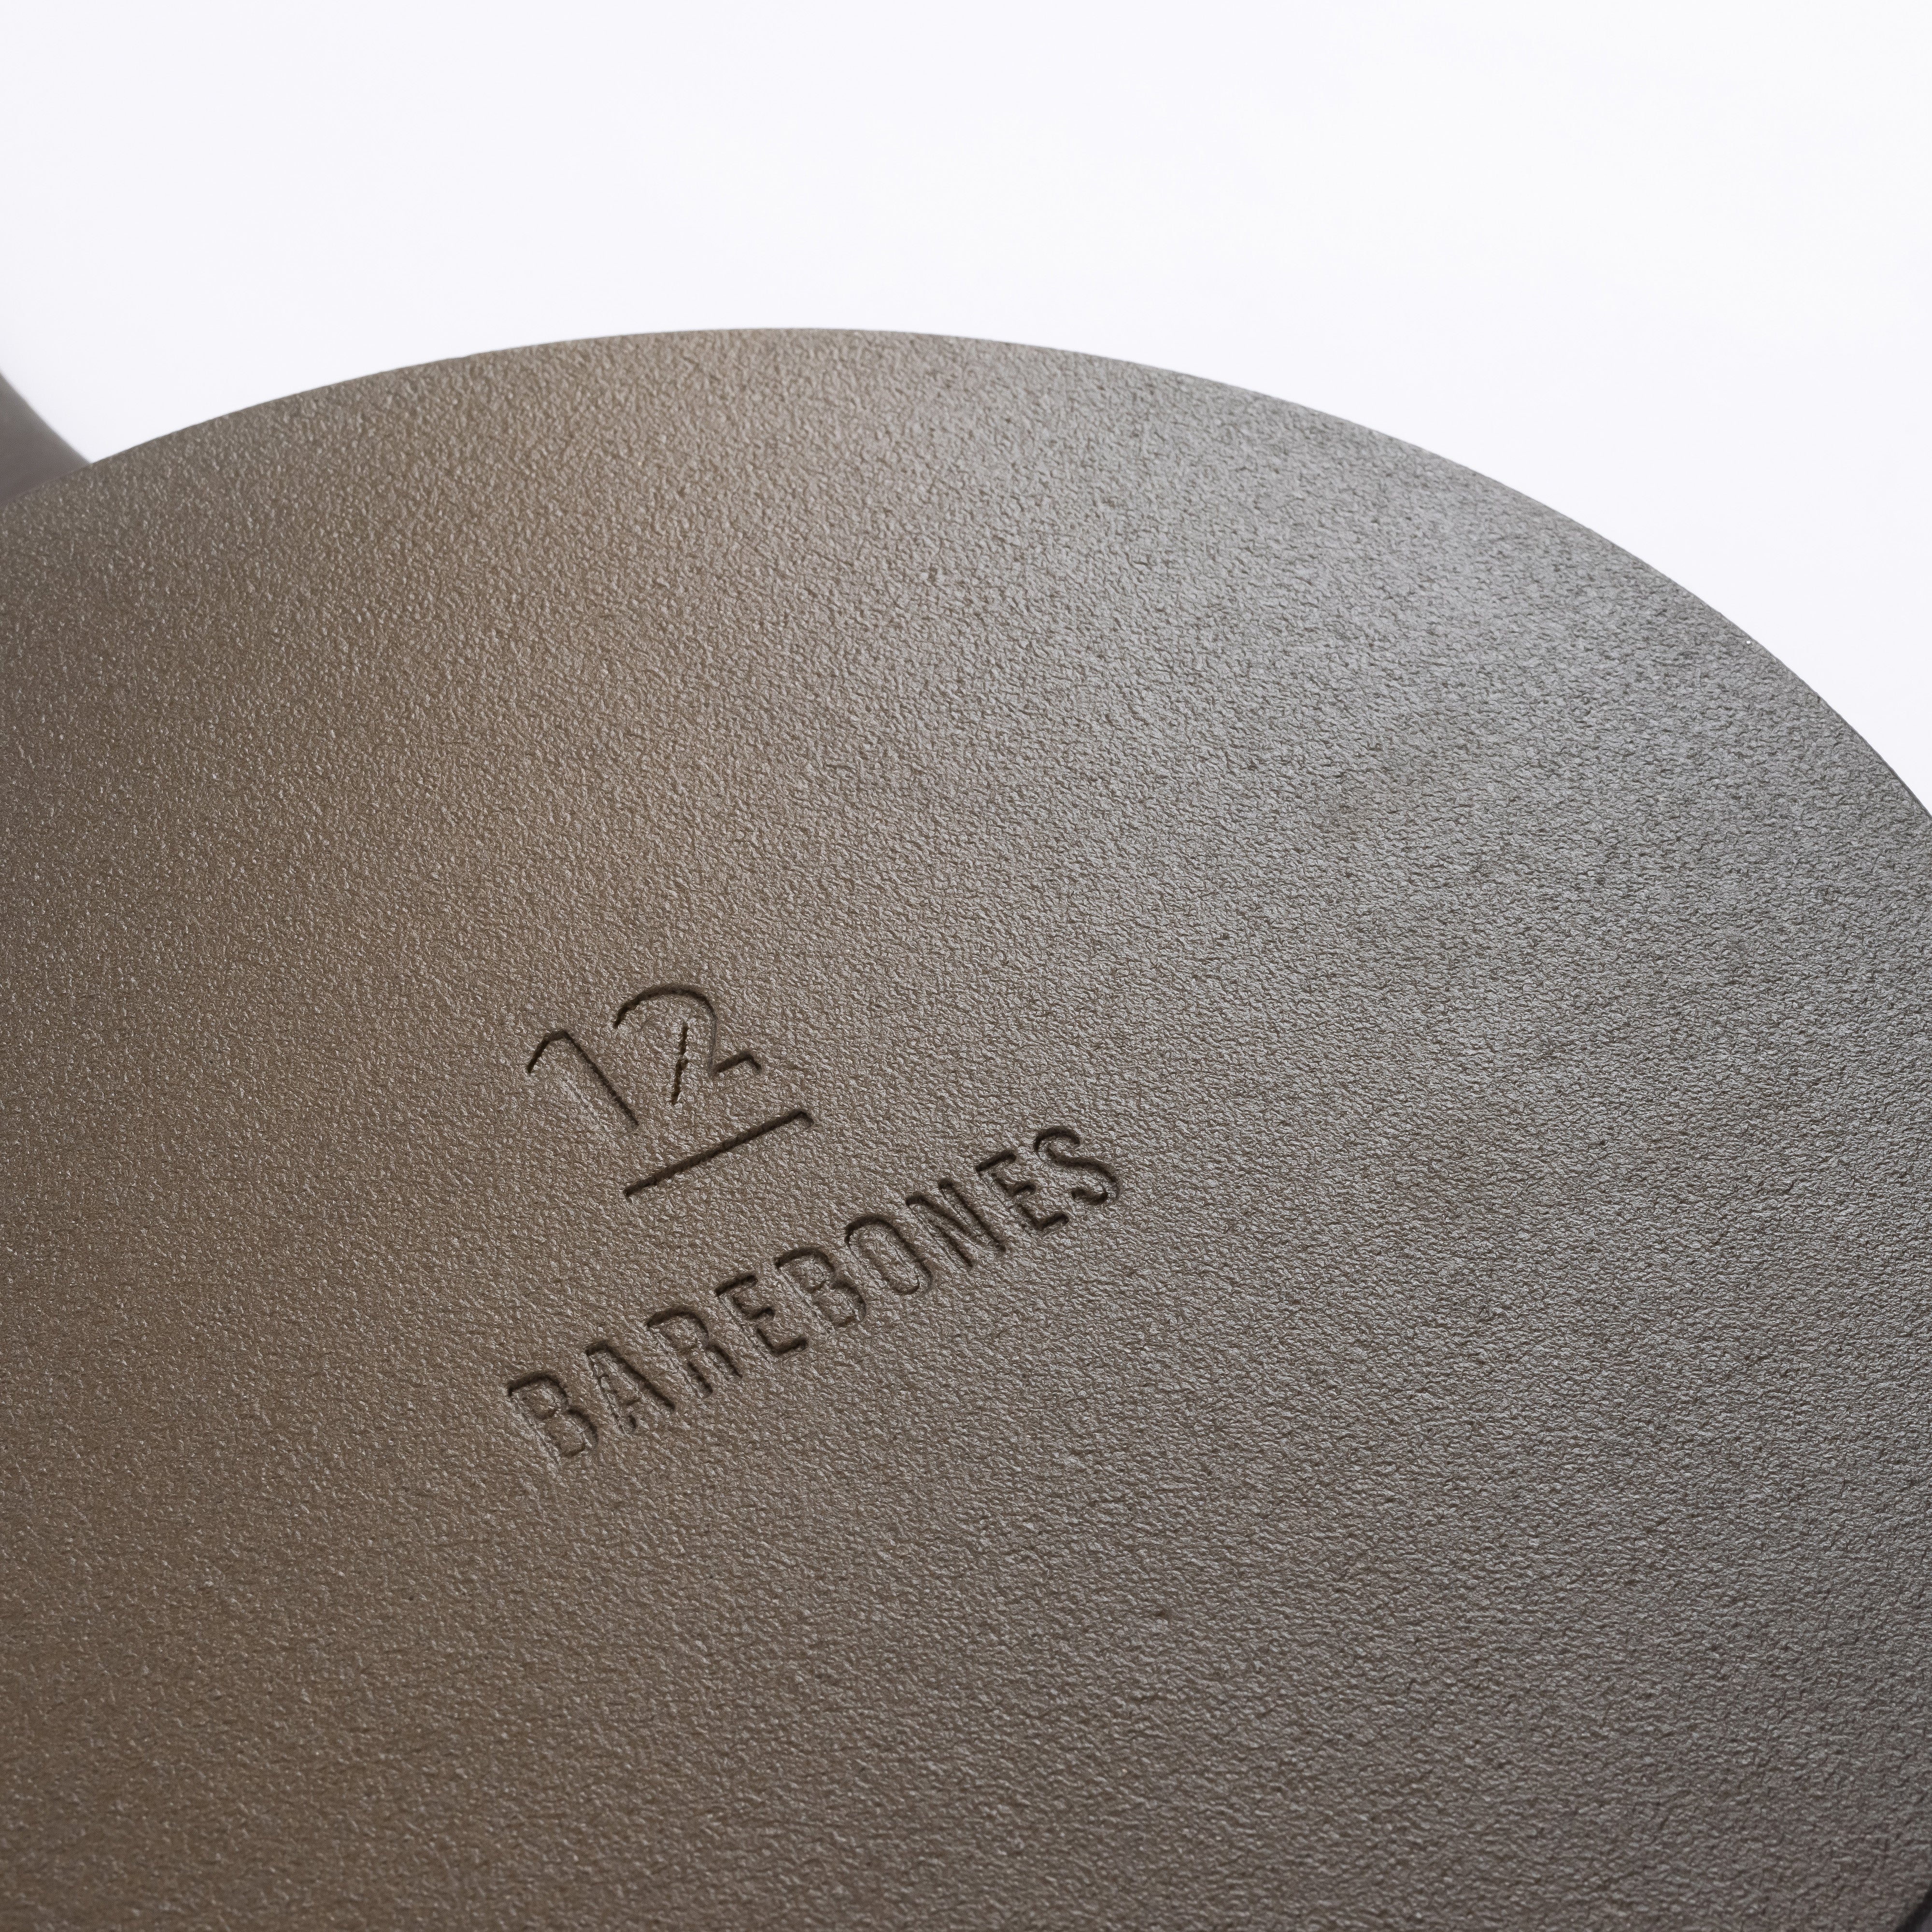 Barebones All-In-One Cast Iron Skillet with Lid. 15, 25 or 30 cm diameter. 